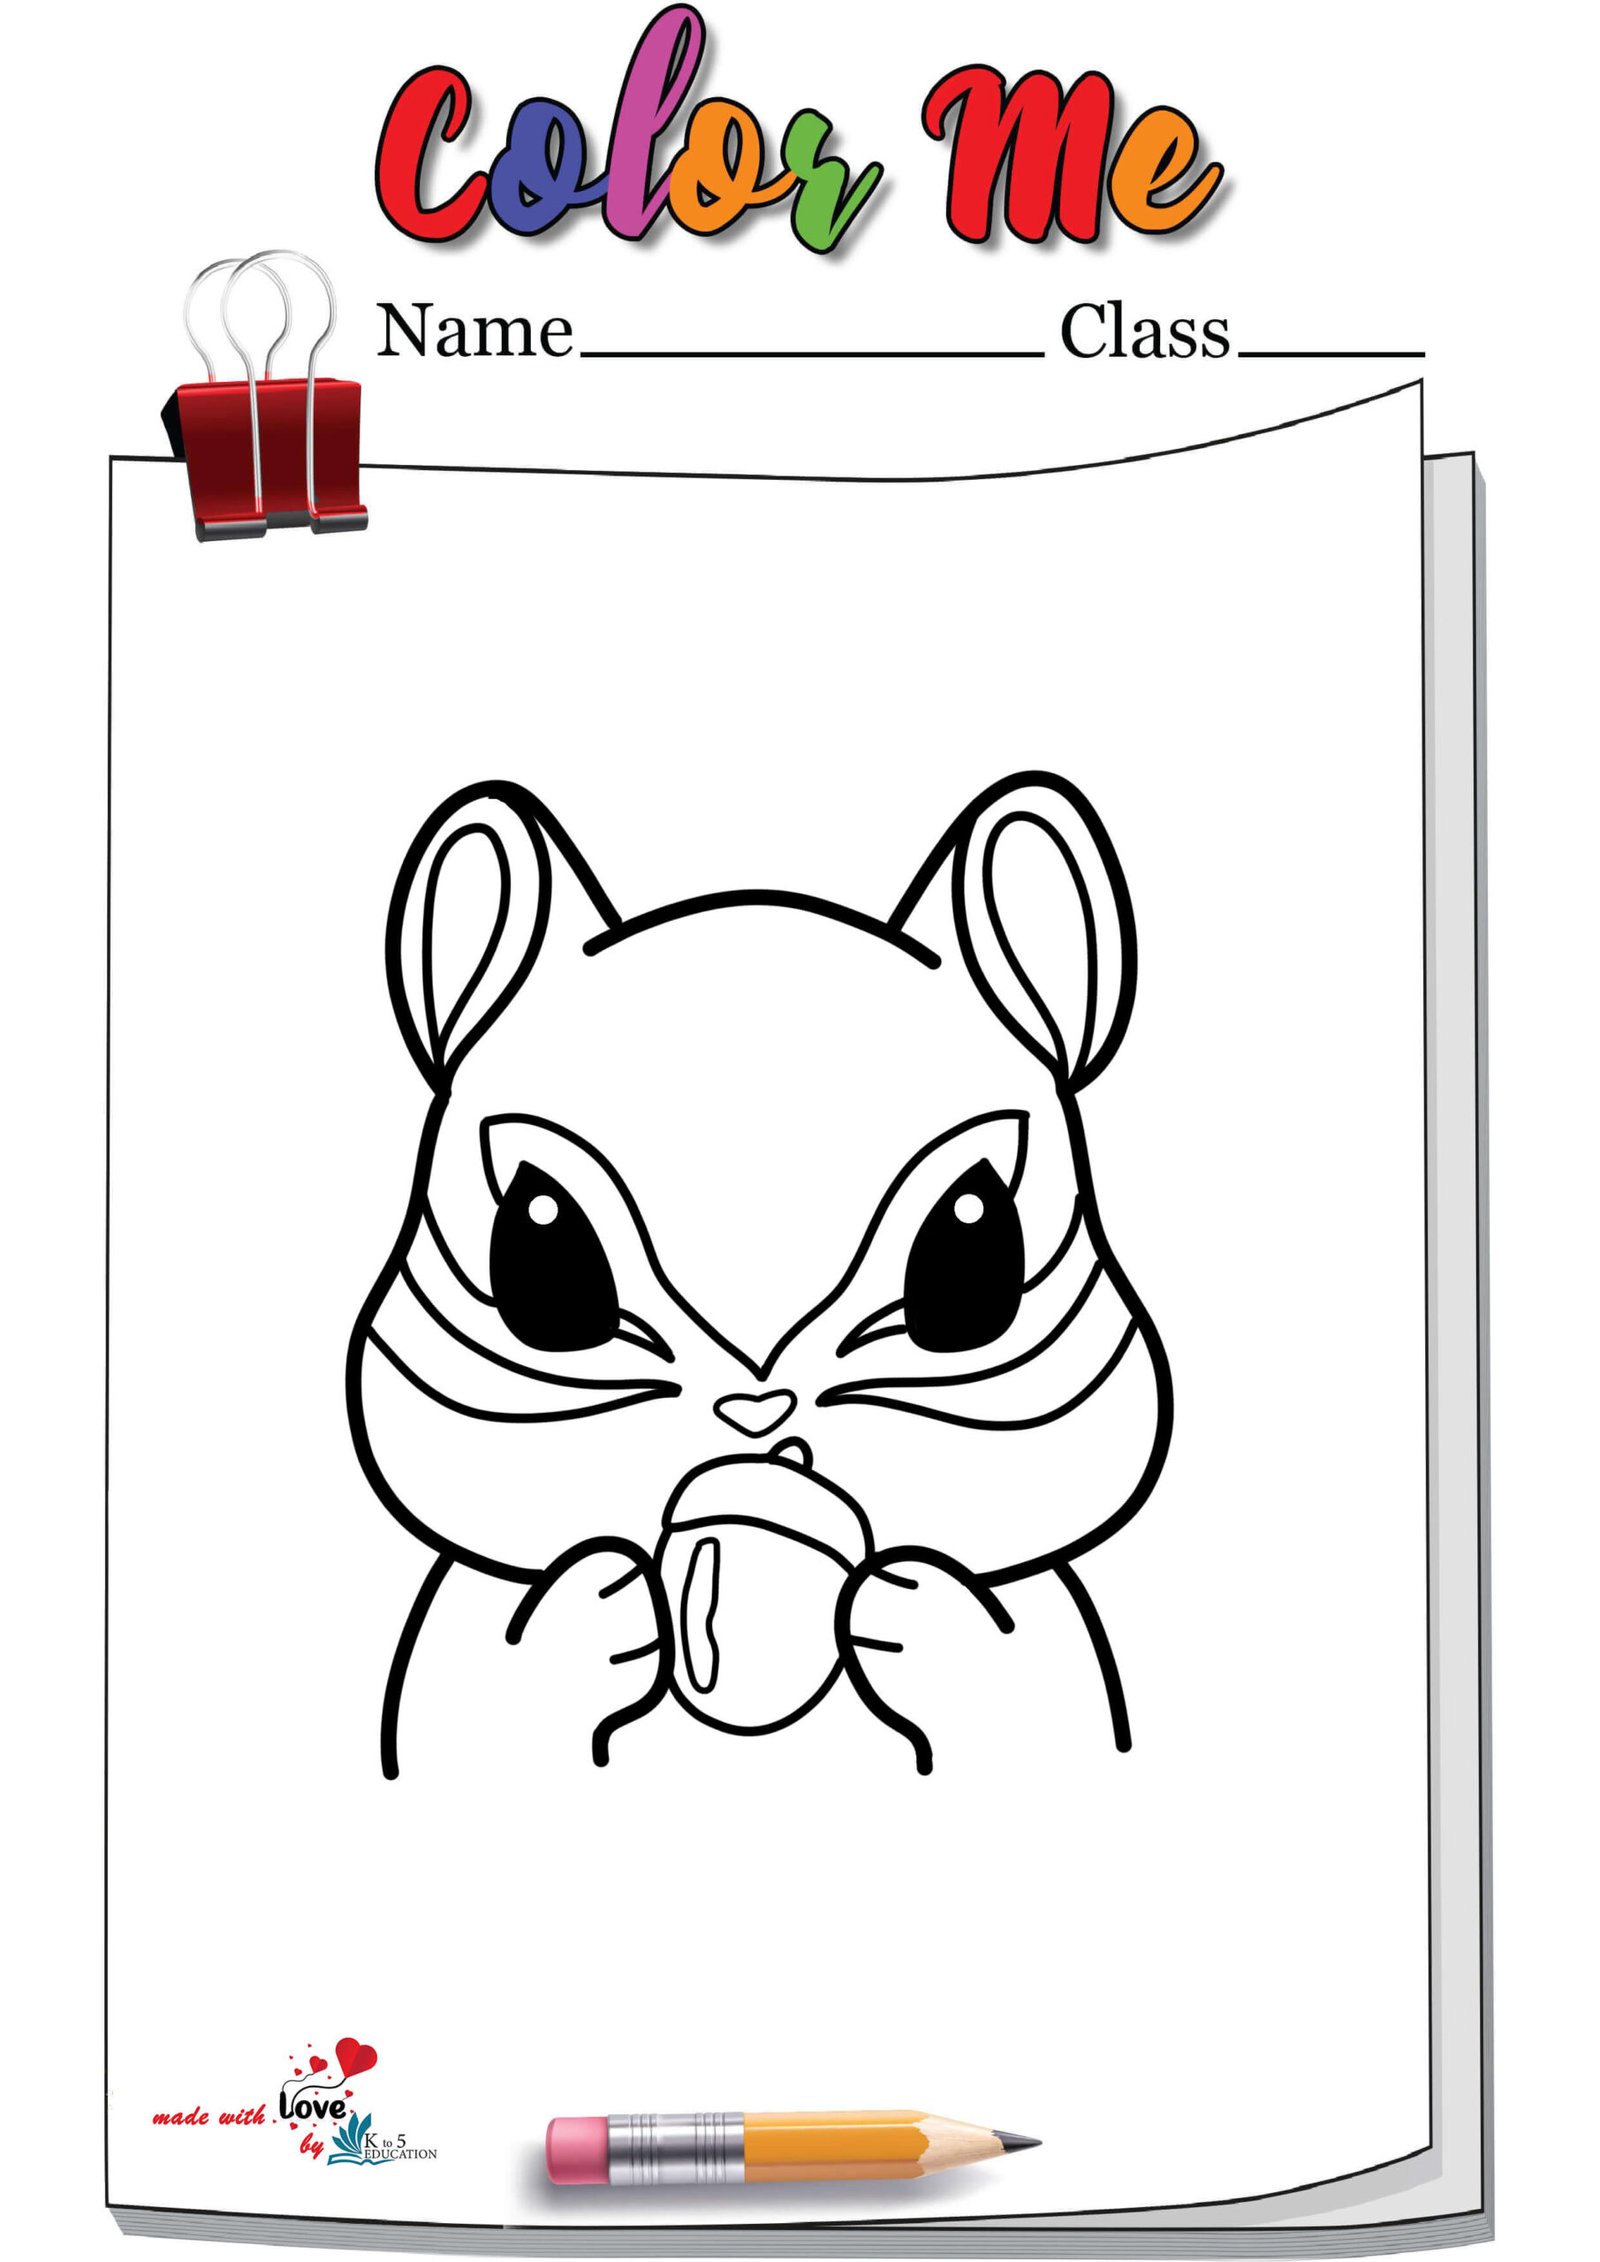 Baby Chipmunk Coloring Page